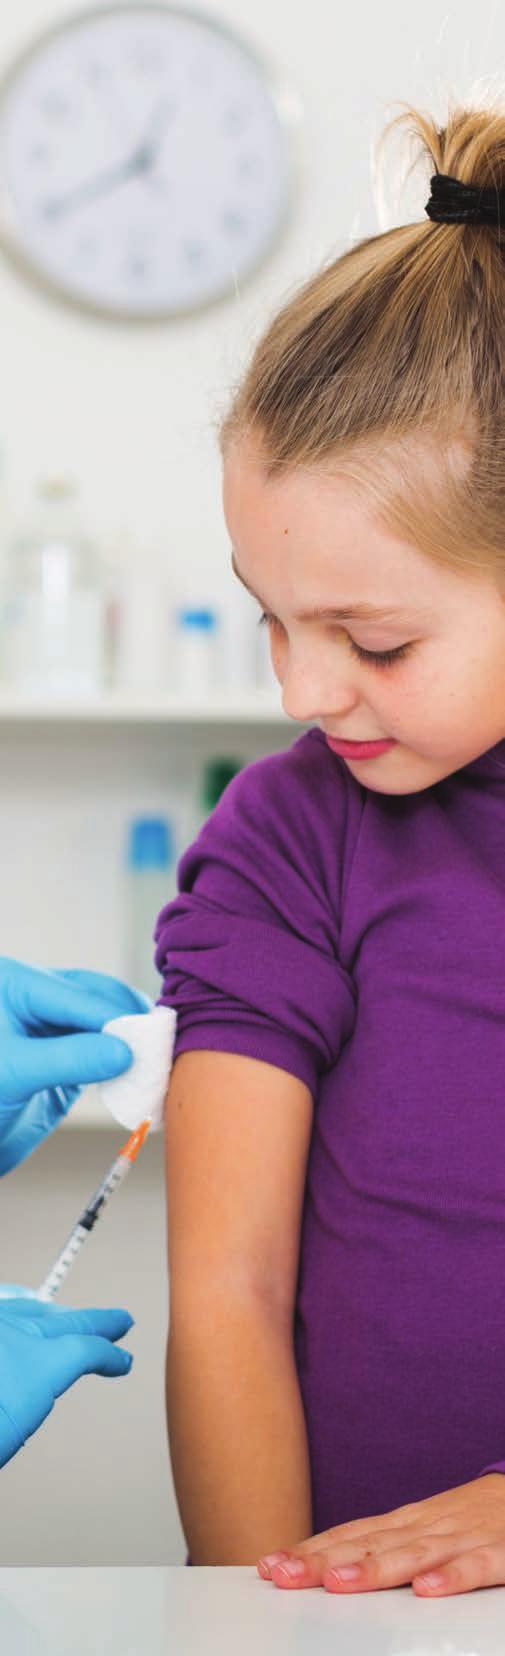 RAPID RECRUITMENT AND PATIENT ACCESS FOR VACCINE TRIALS Leading Vaccine Recruitment and Enrollment Expertise We leverage our broad vaccine experience to provide a comprehensive enrollment solution